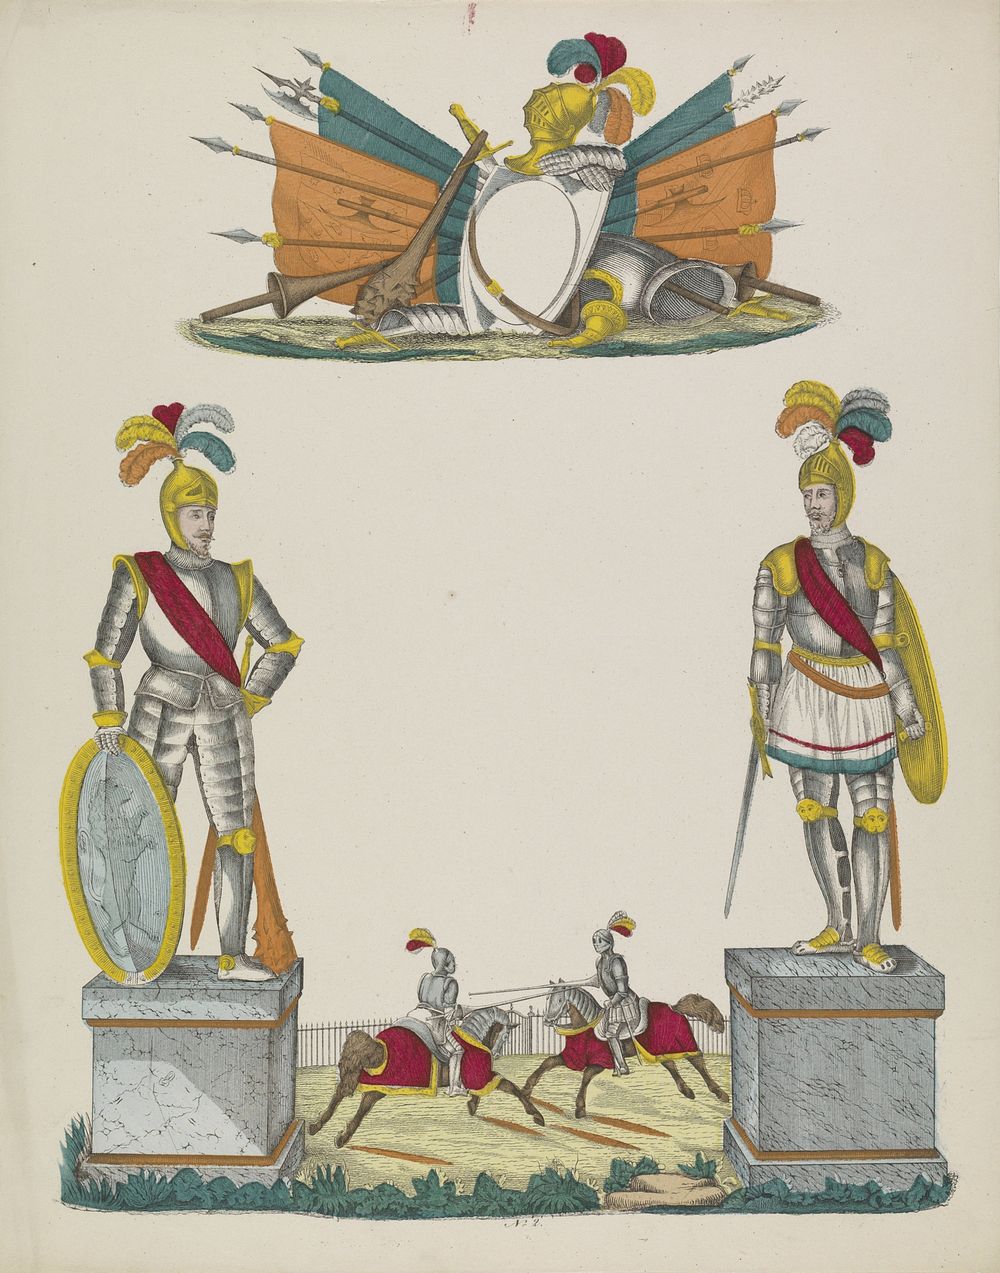 Wensbrief met riddertoernooi (c. 1780 - c. 1899) by P Lenaerts and anonymous